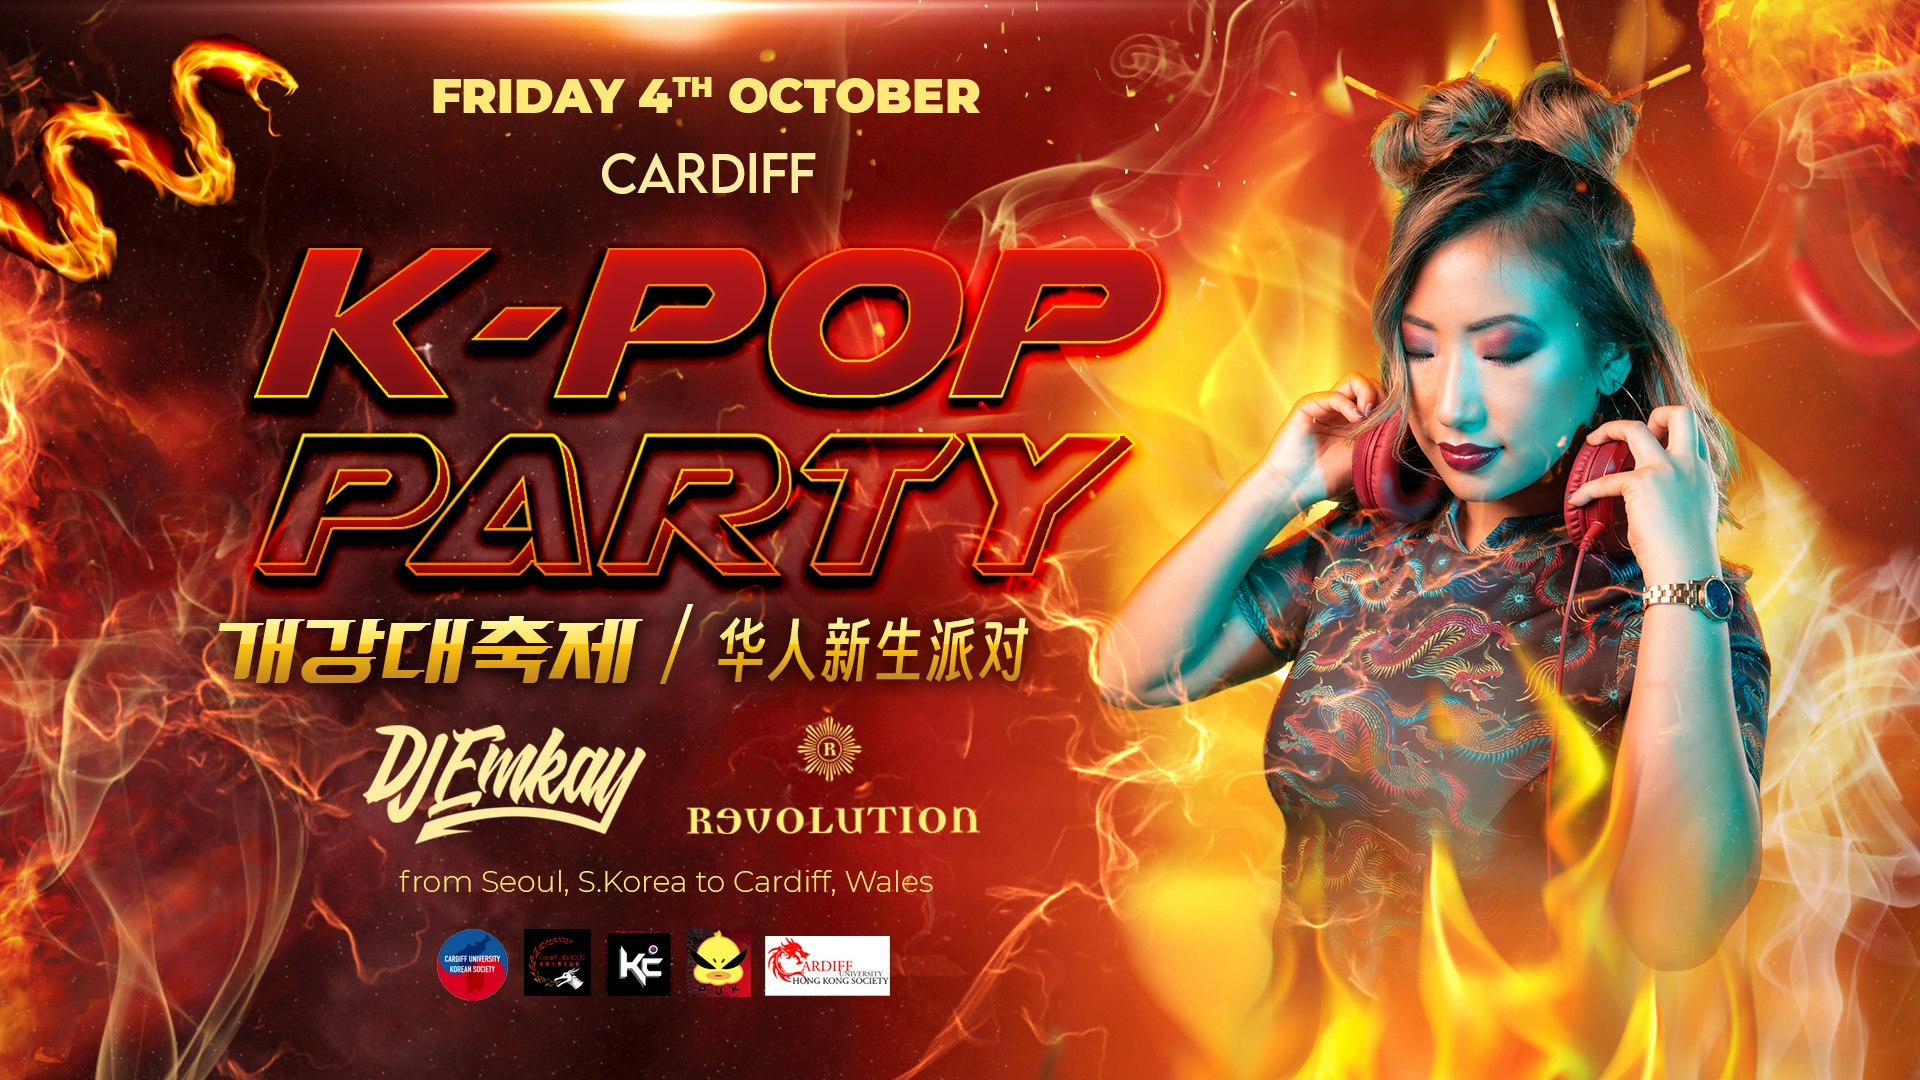 Cardiff K-Pop Party – Fire Tour with DJ EMKAY | Friday 4th October